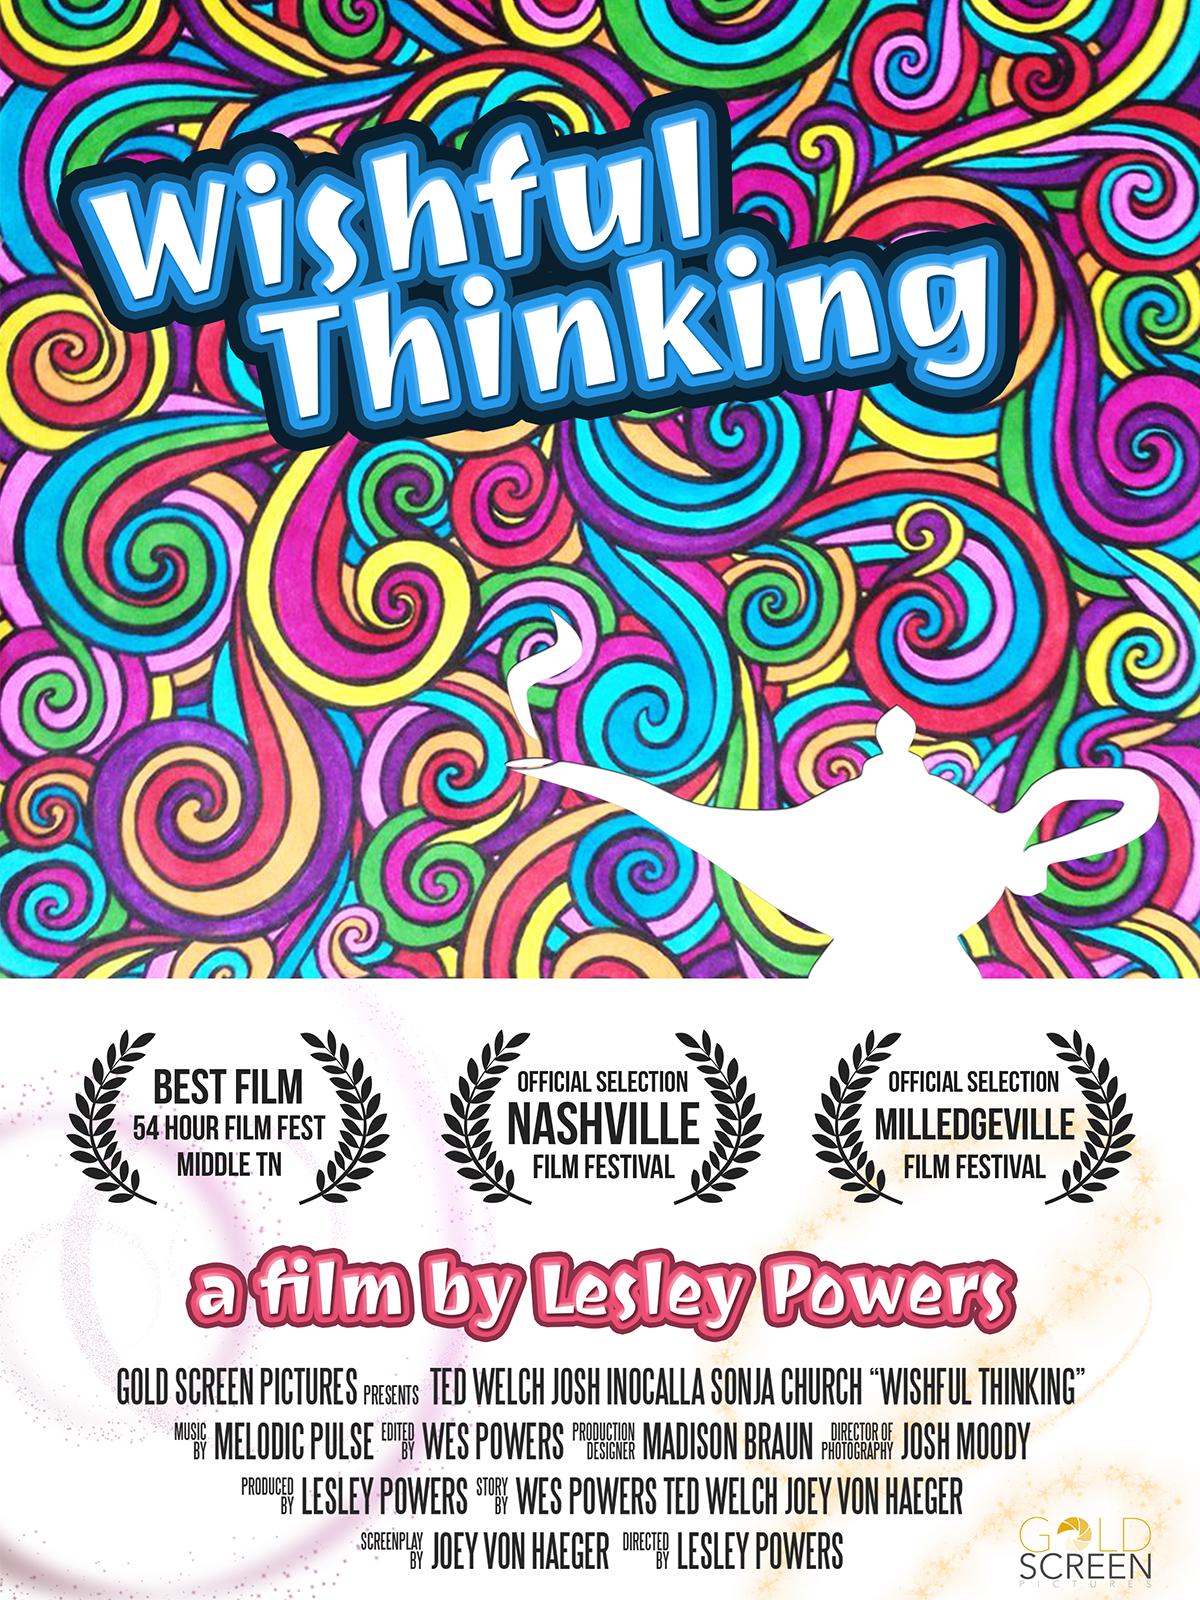 clarisse cook recommends wishful thinking full movie pic